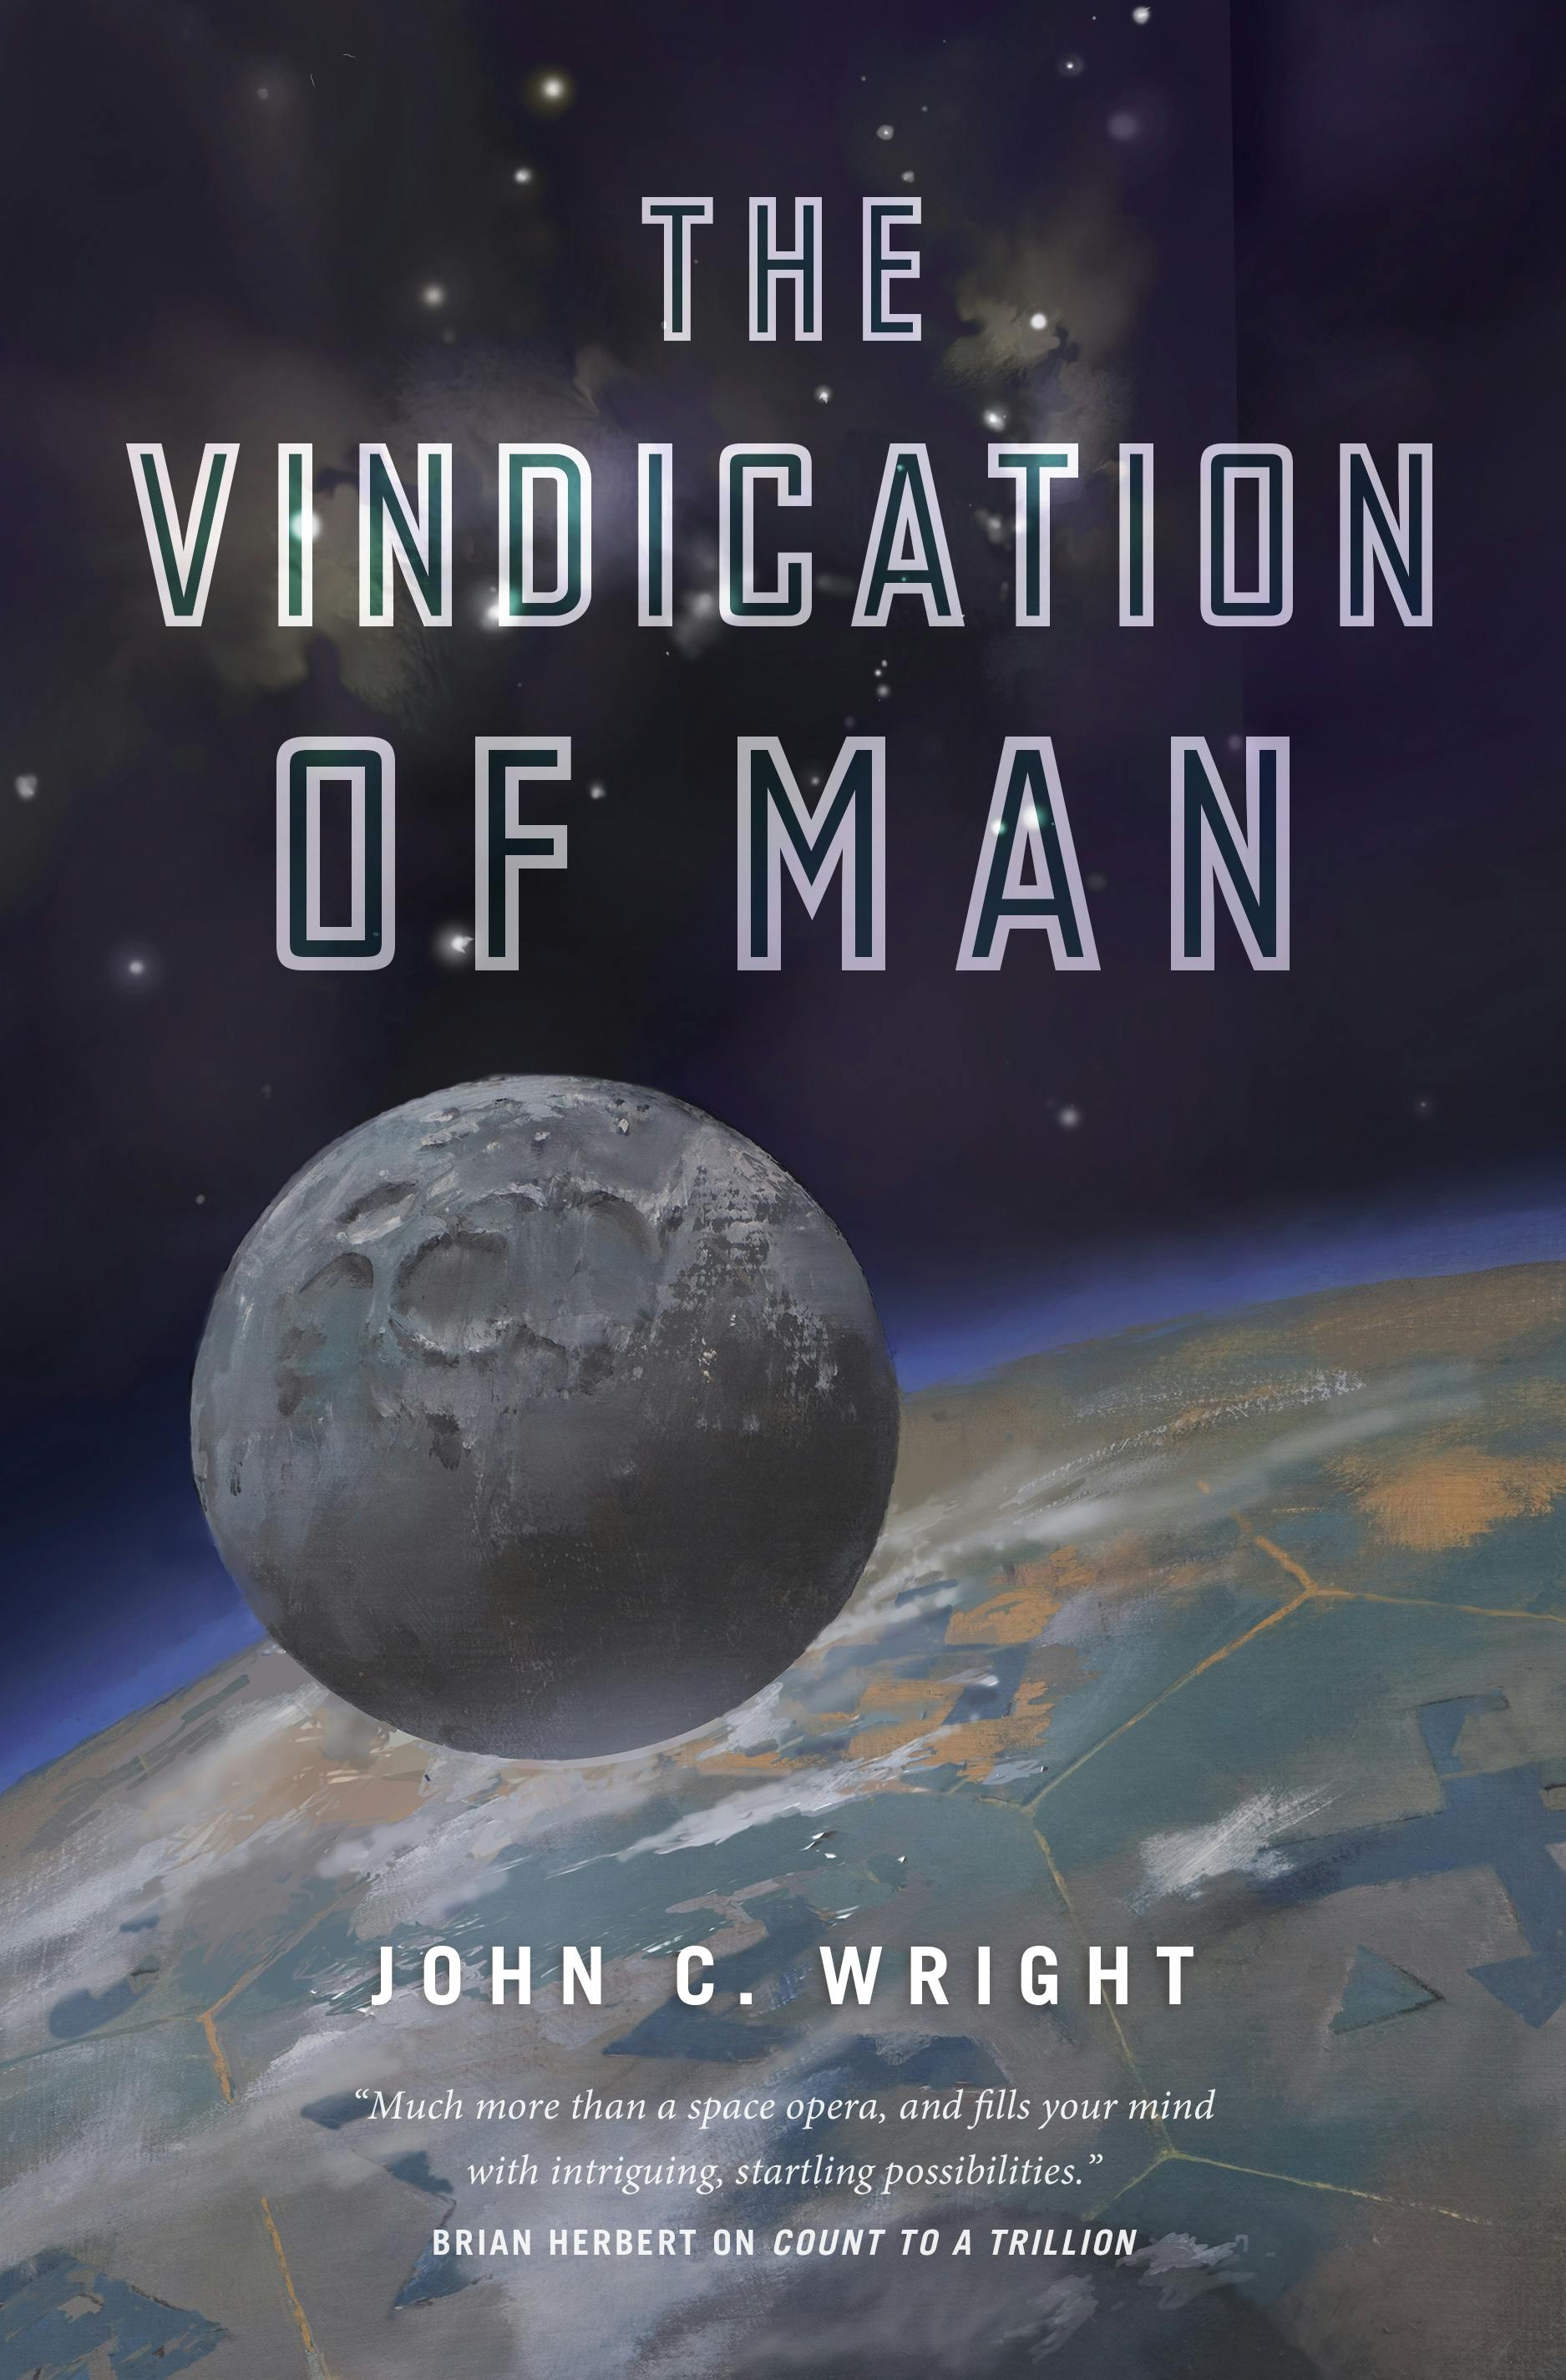 Cover for the book titled as: The Vindication of Man